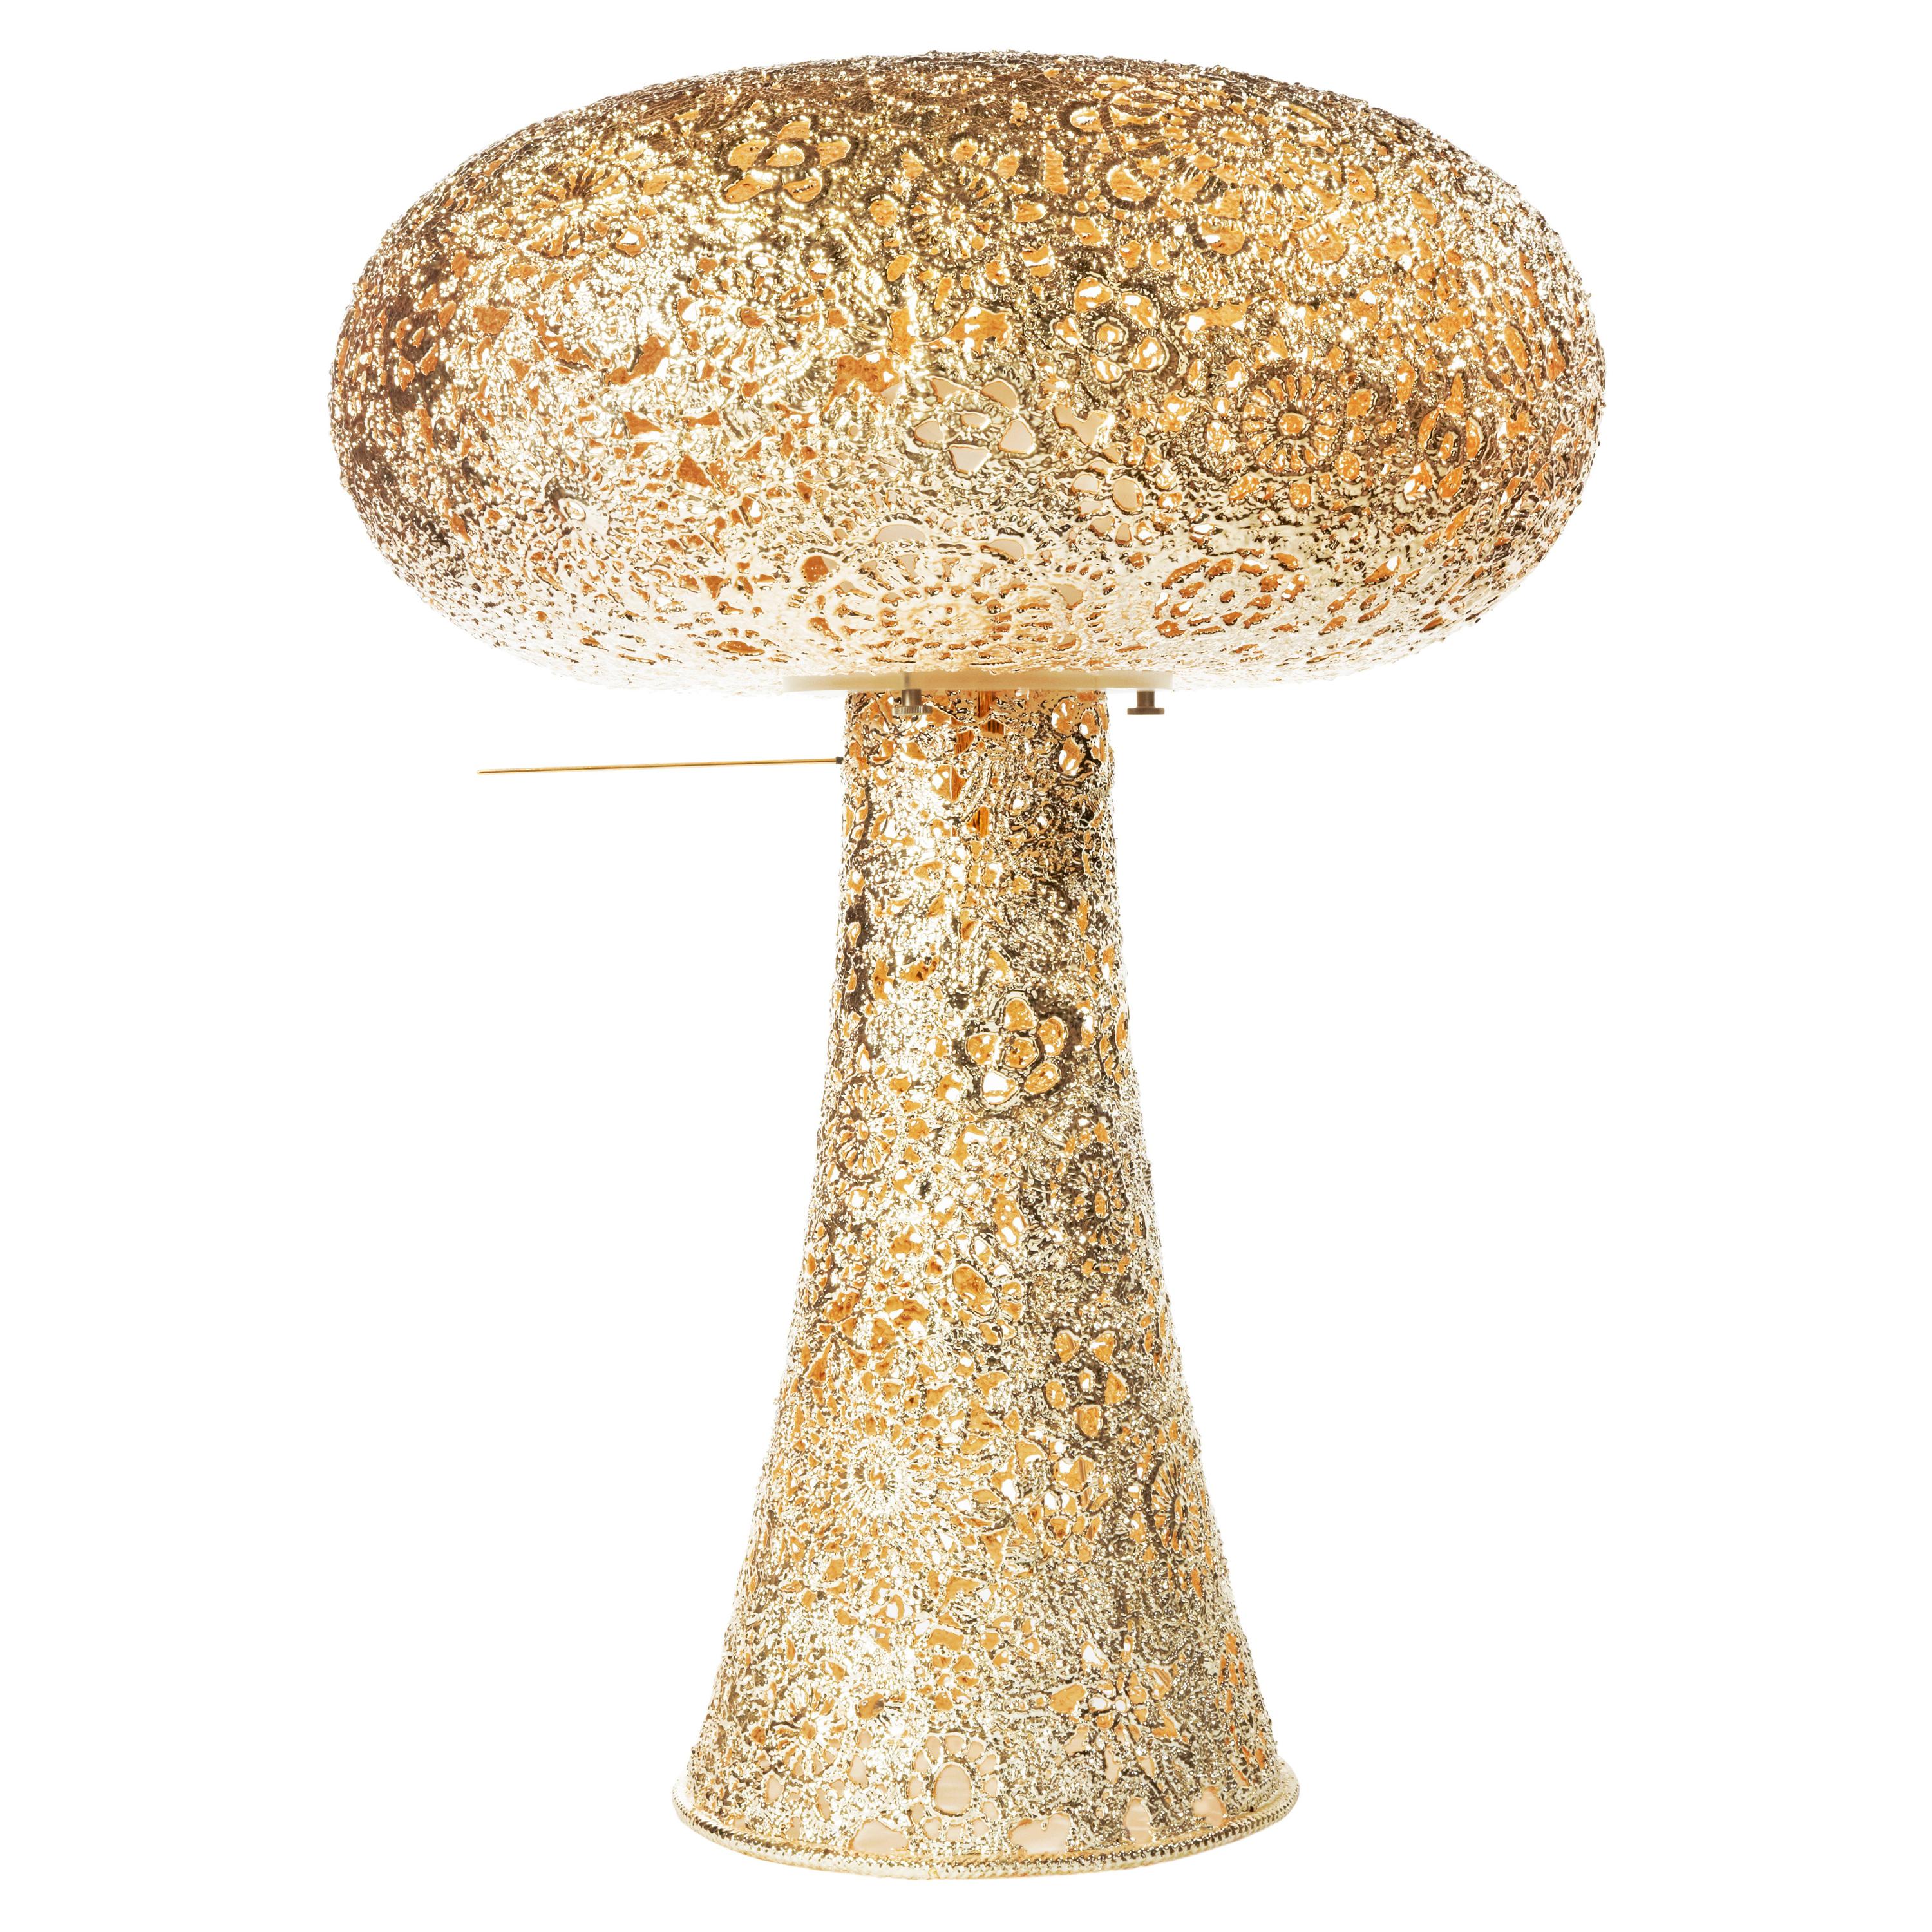 Gold Blossom, by Marcel Wanders, Crocheted Lamp, 2010, Gold, Edition #2/5